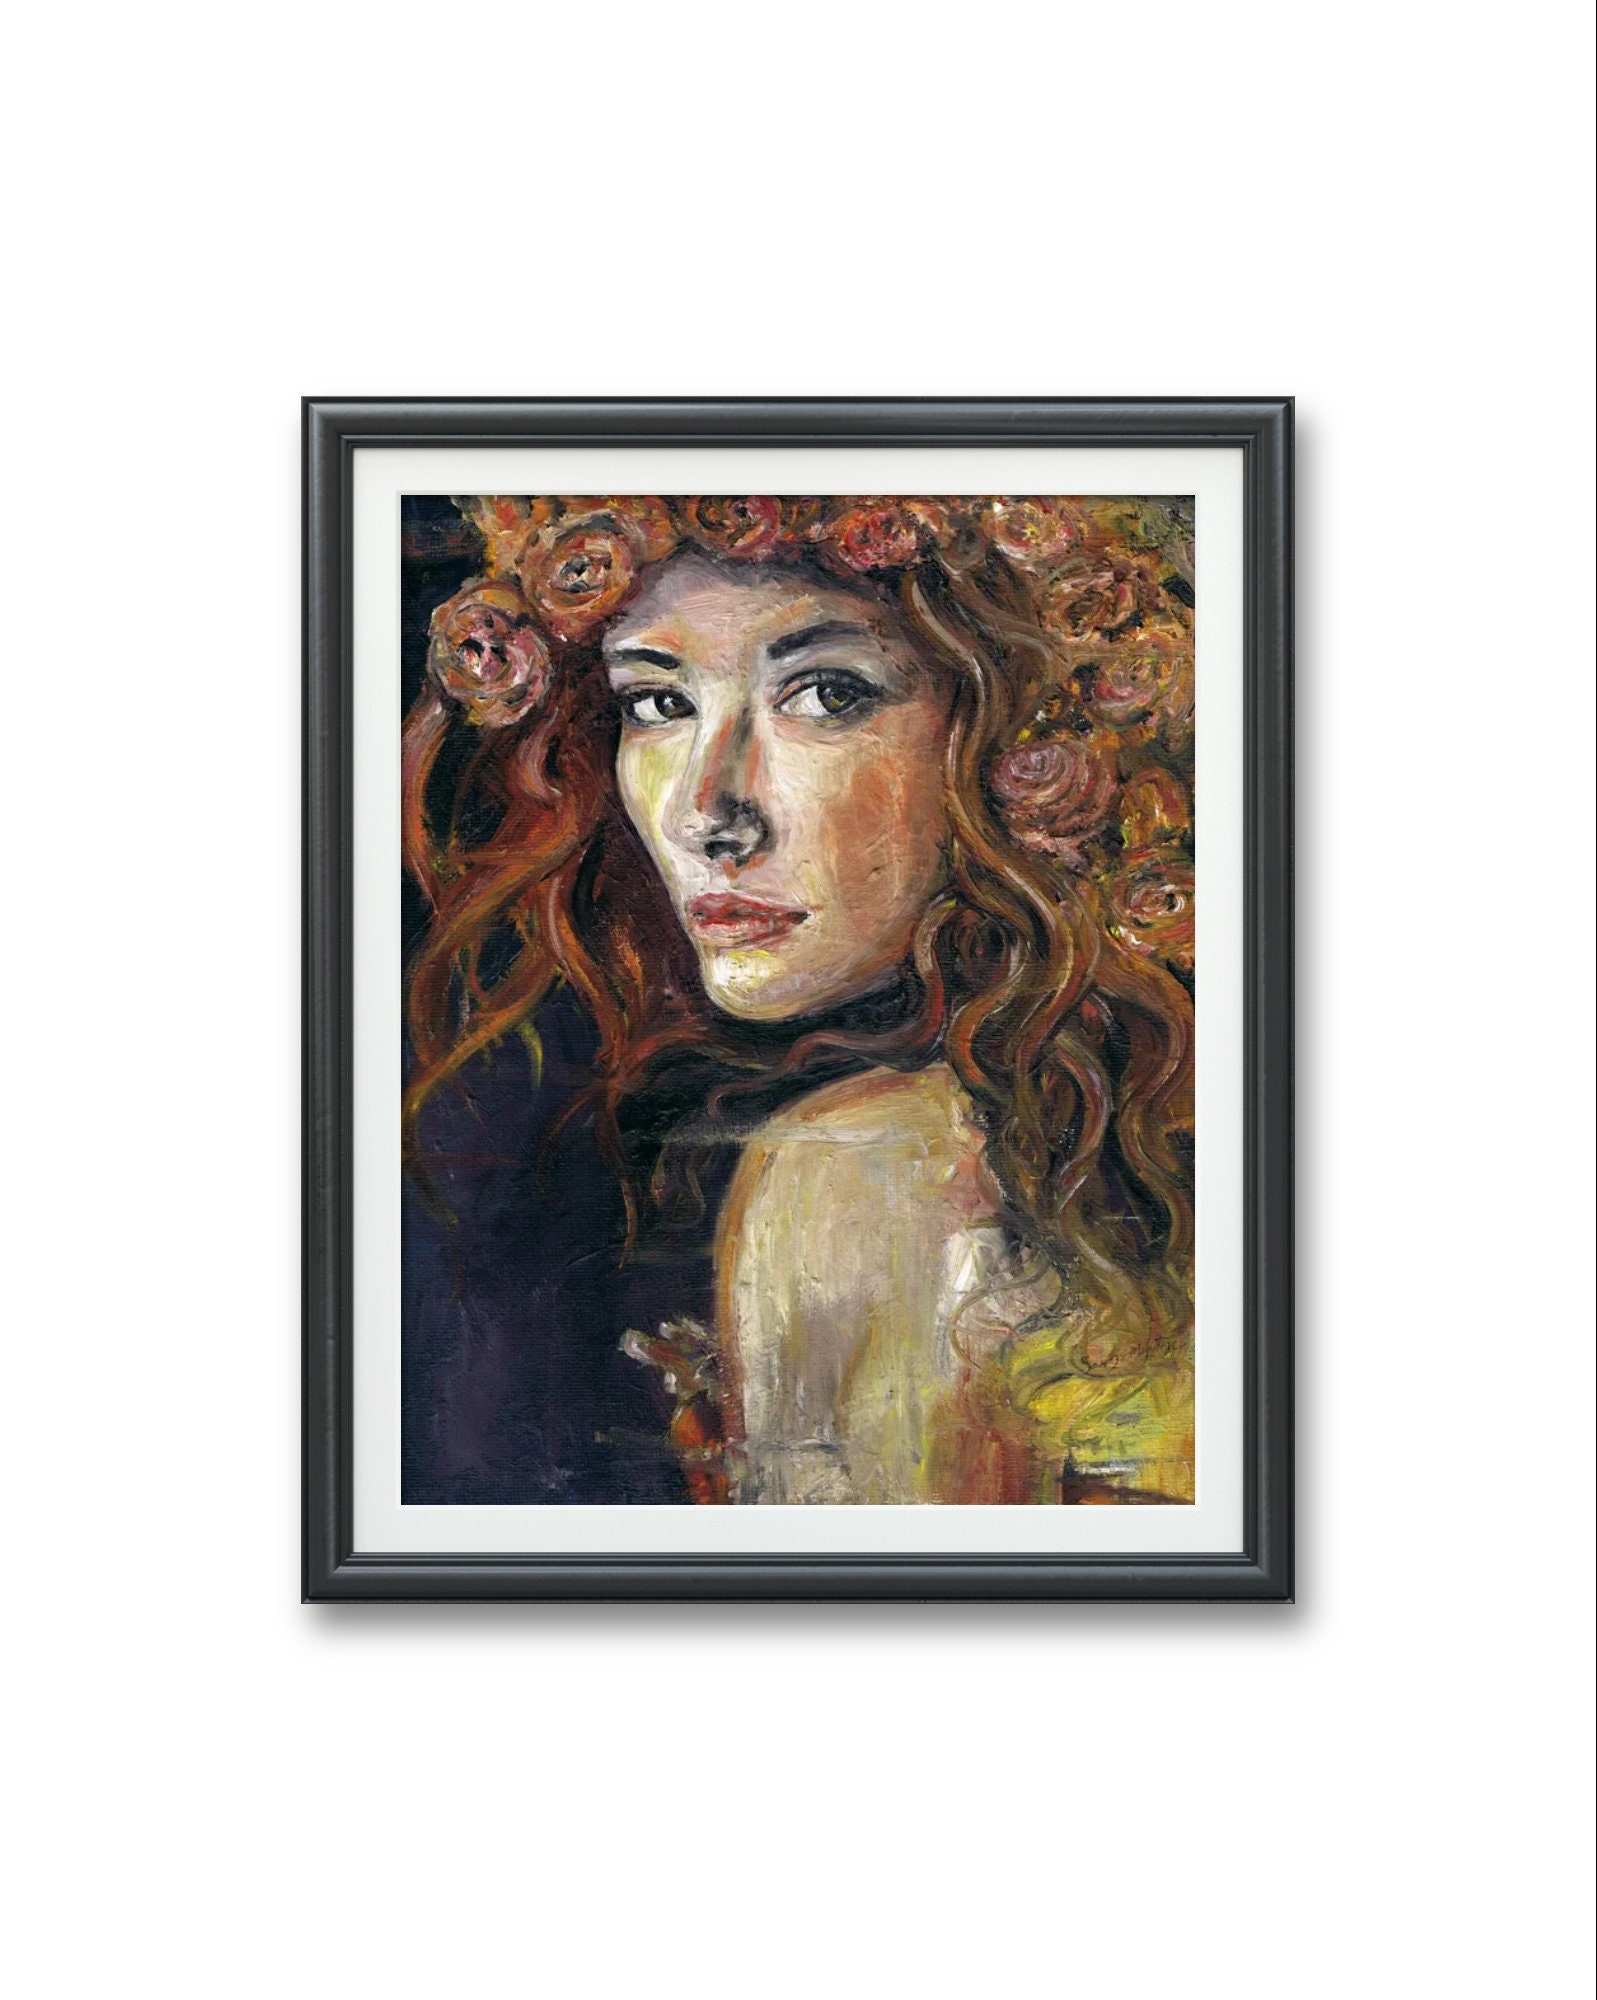 Flowers Canvas Painting She Had The Soul Of A Gypsy The - Temu